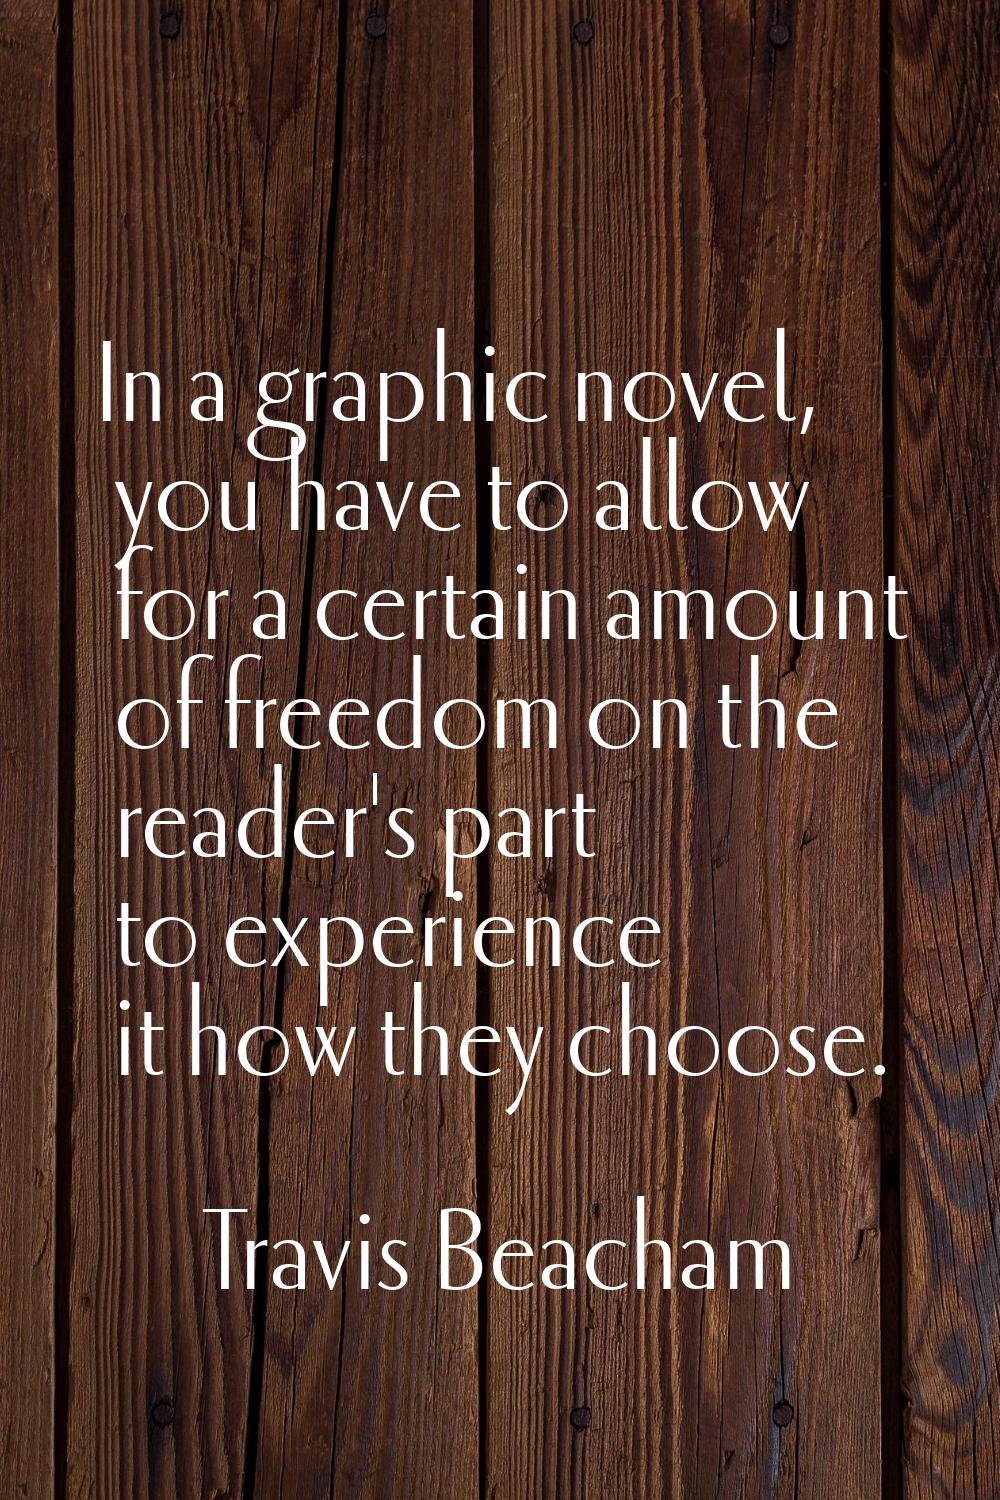 In a graphic novel, you have to allow for a certain amount of freedom on the reader's part to exper